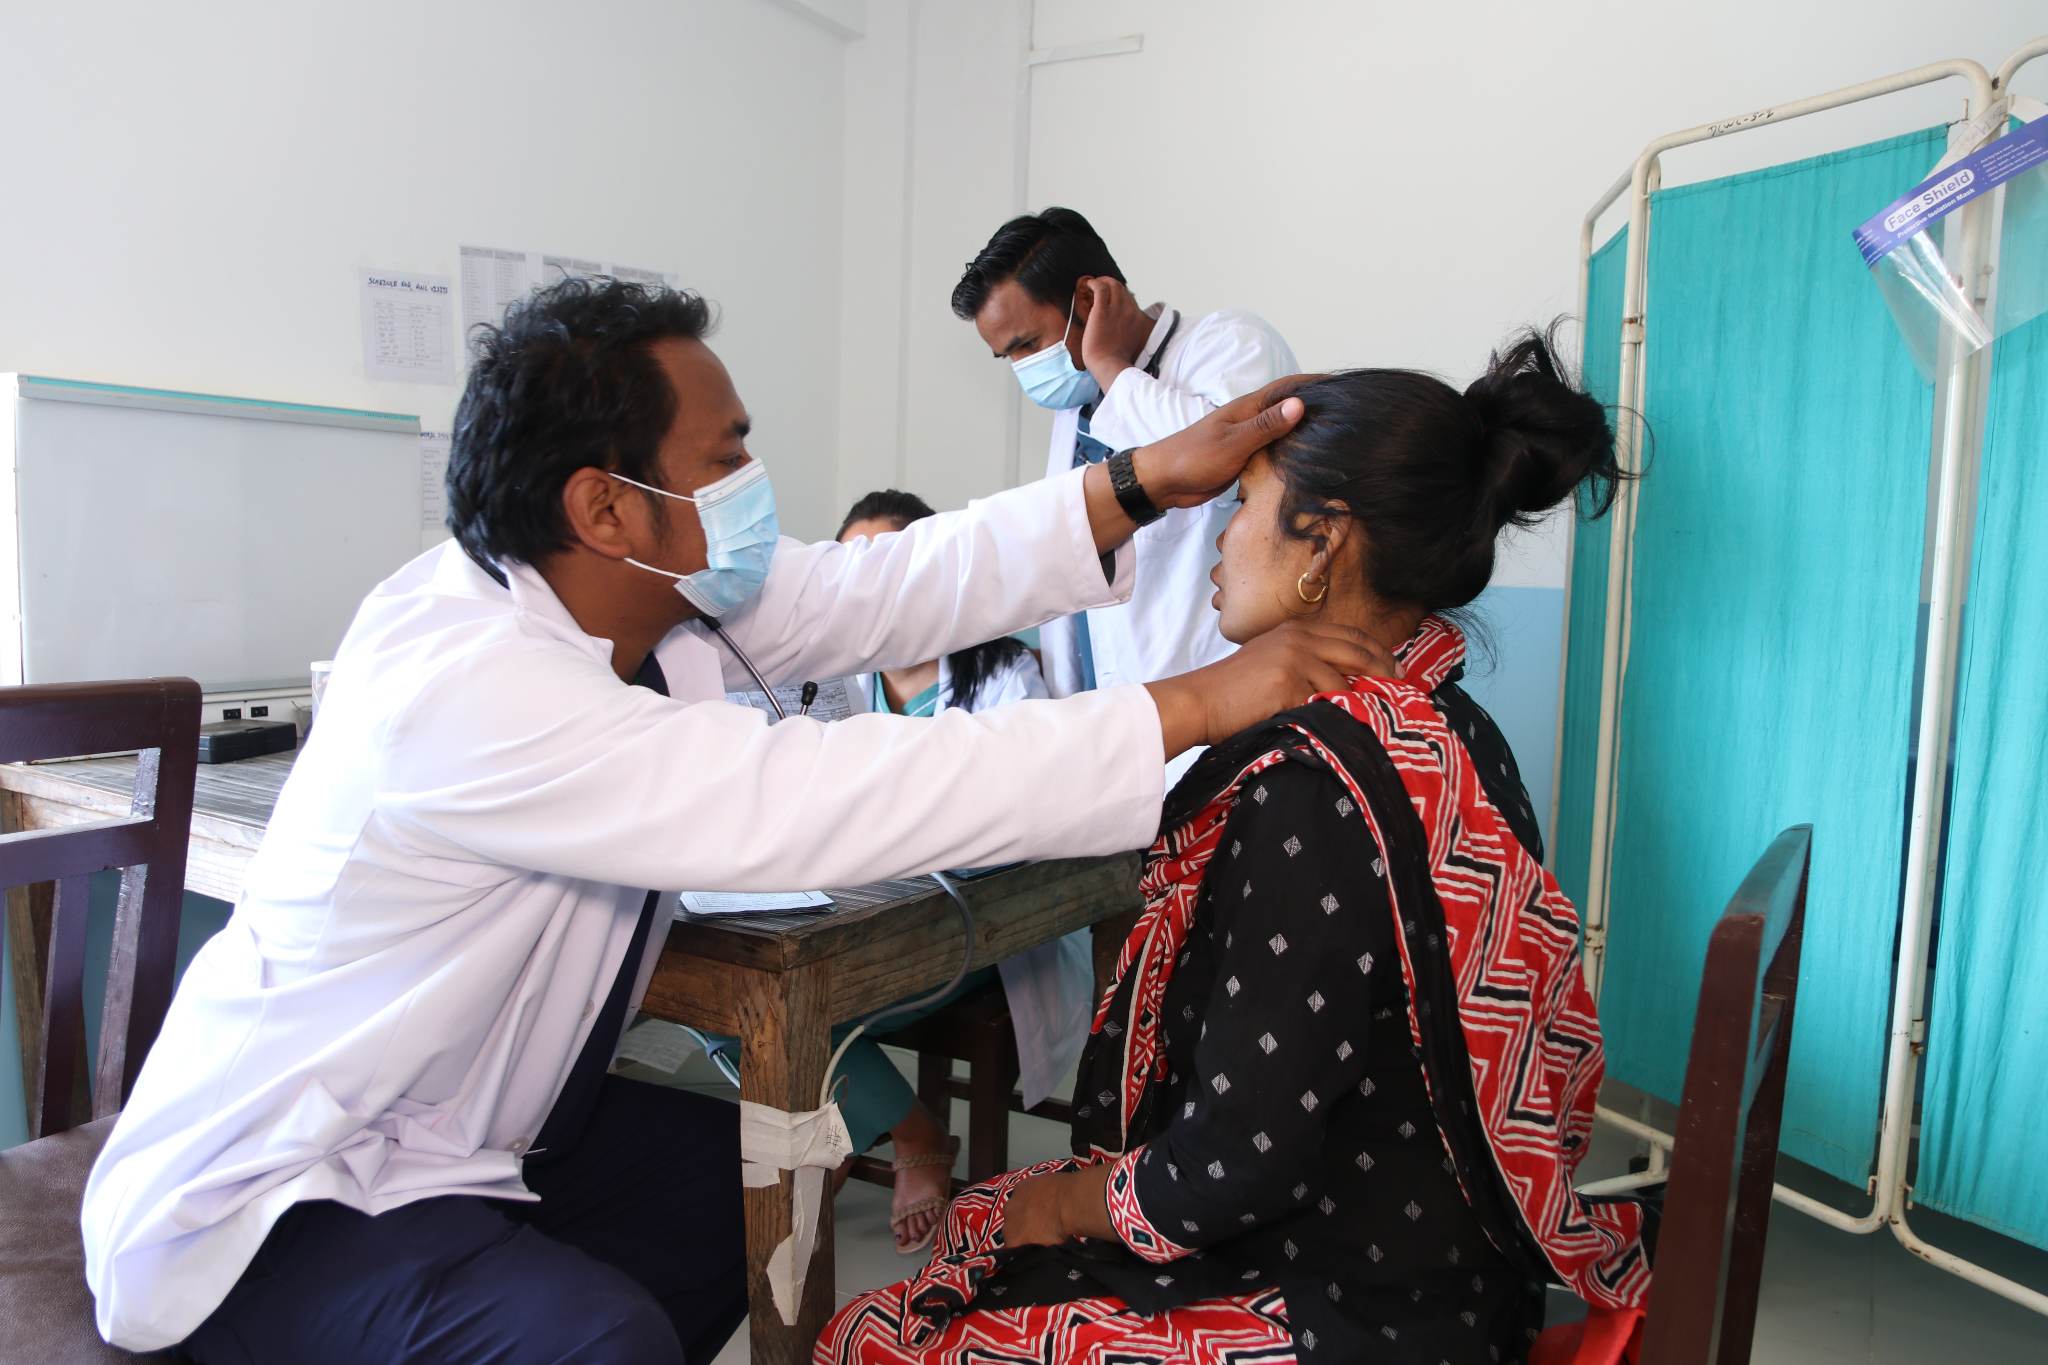 Some glimpse of Two Days Free Dental Camp held on 27-28 Jan 2023